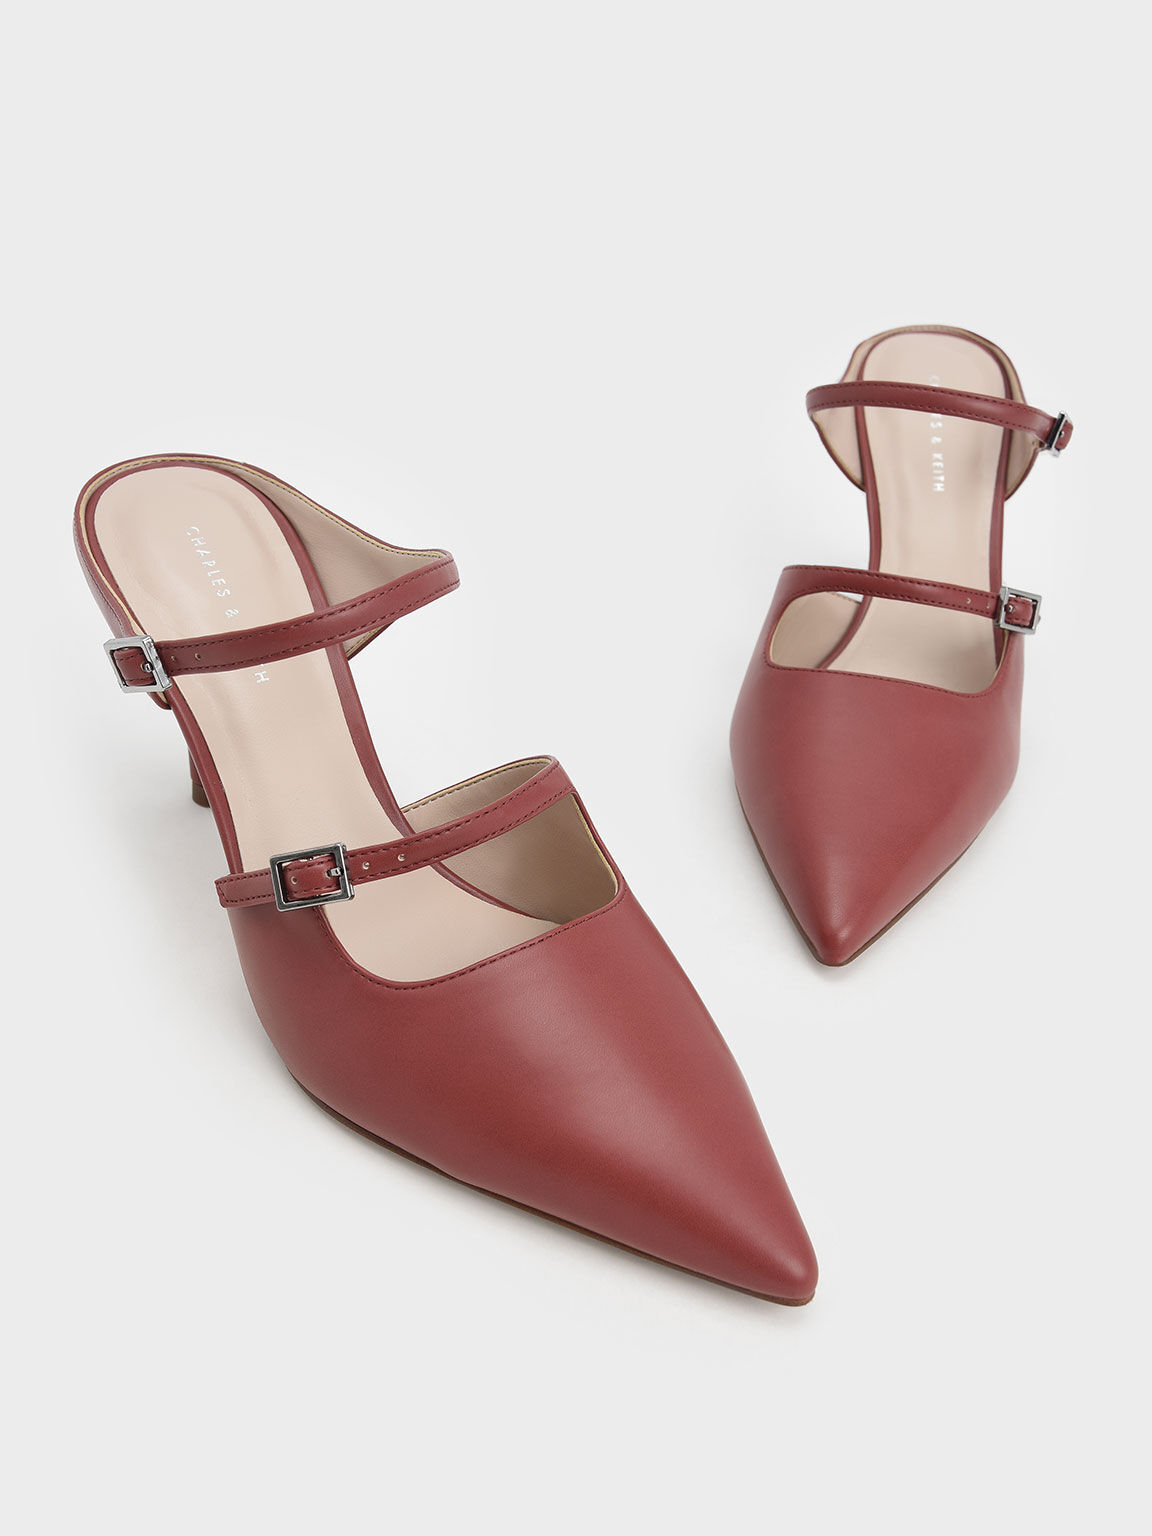 Double Strap Mary Jane Mules, Brick, hi-res